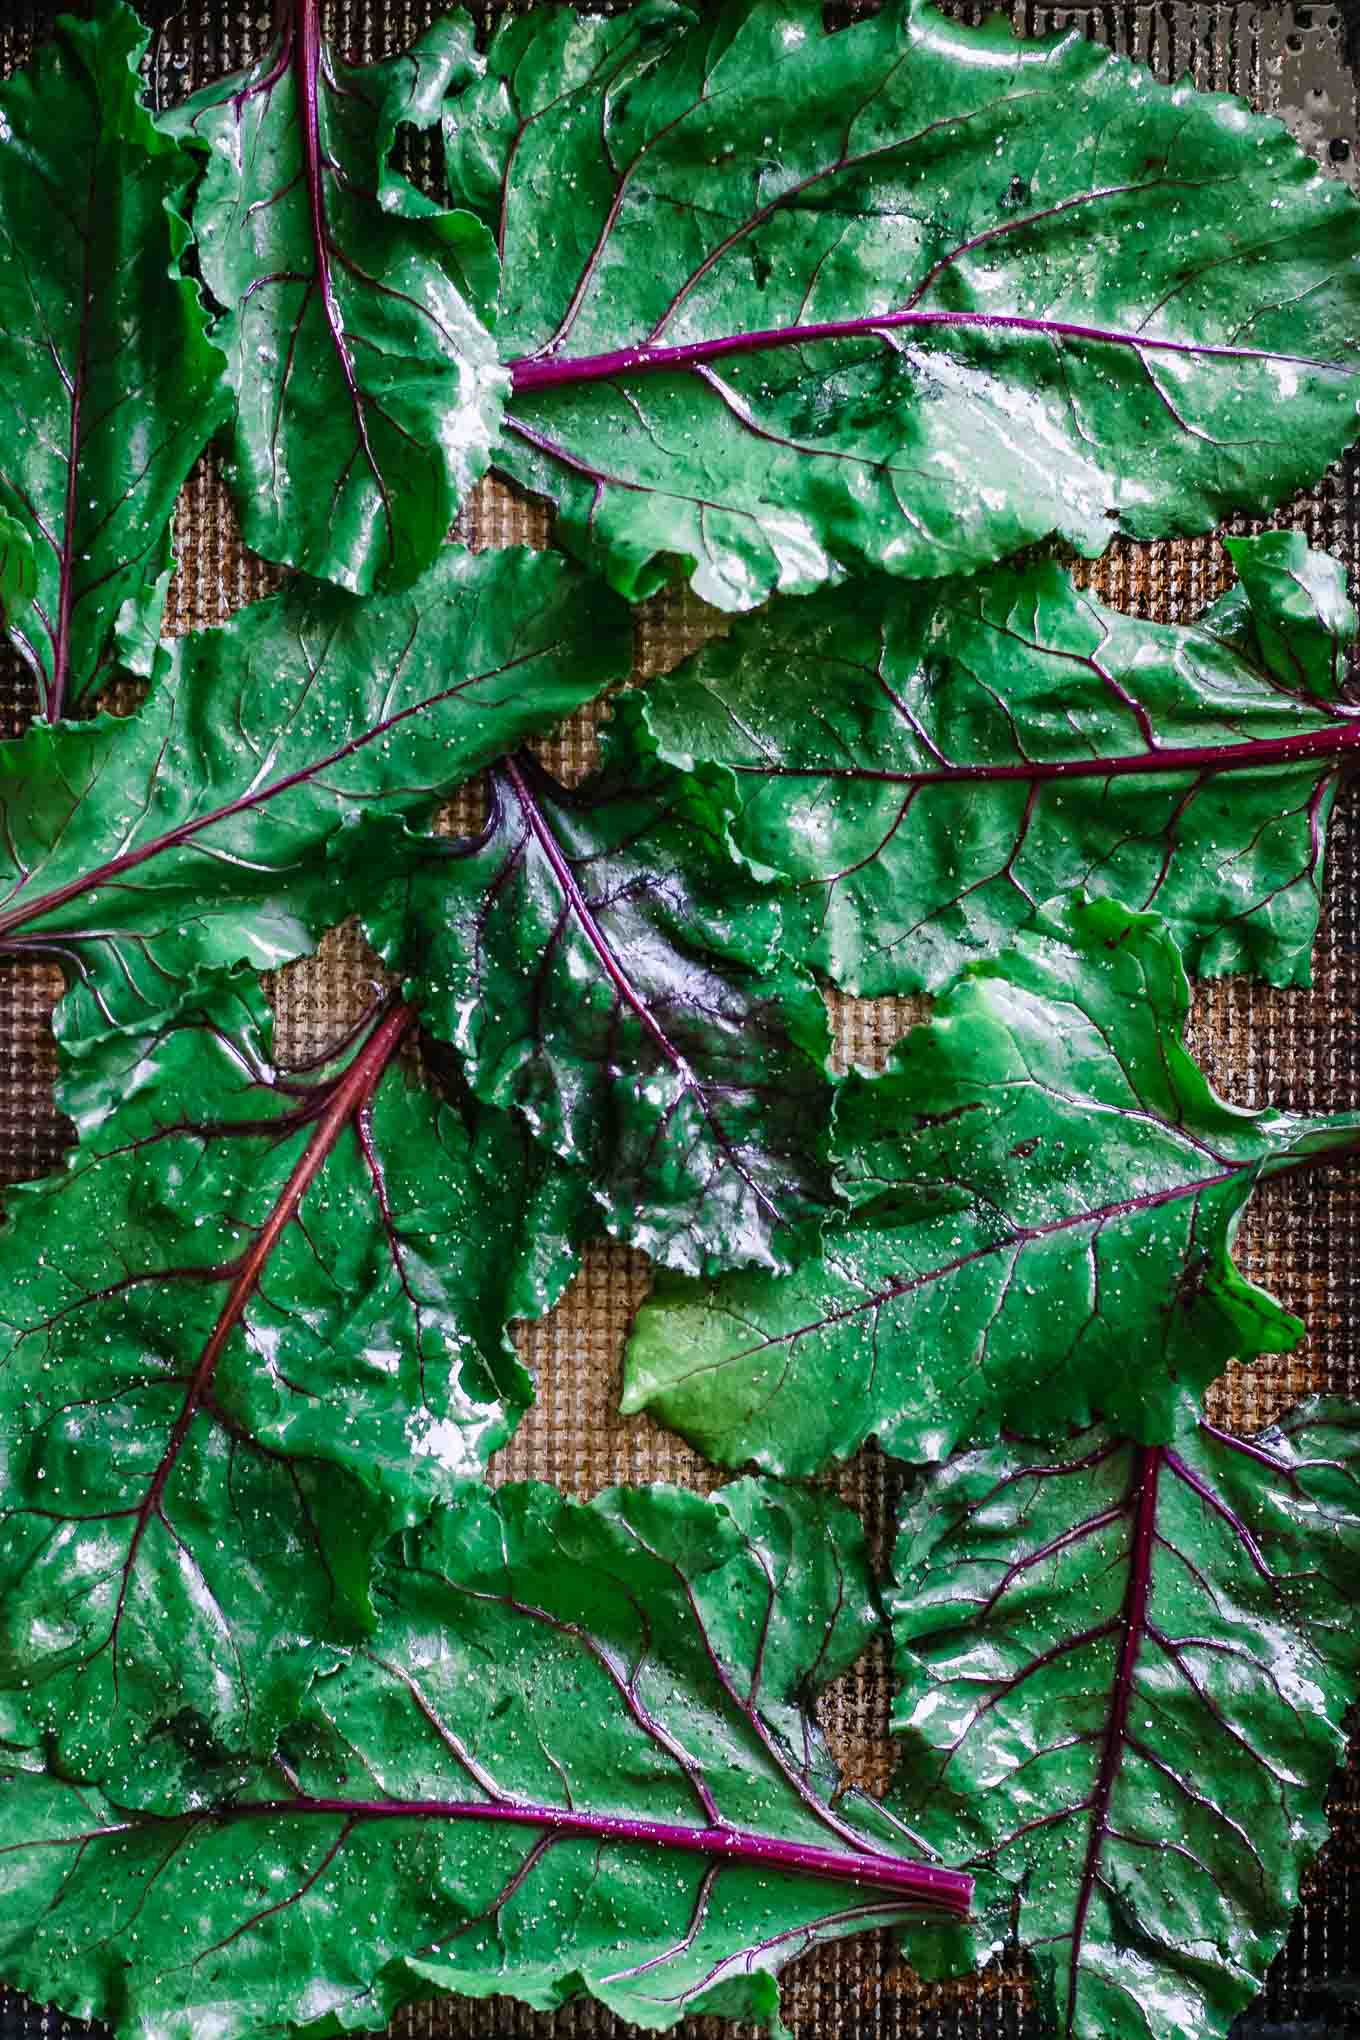 Crispy Baked Beet Greens ⋆ Make Chips from Roasted Beet Leaves!